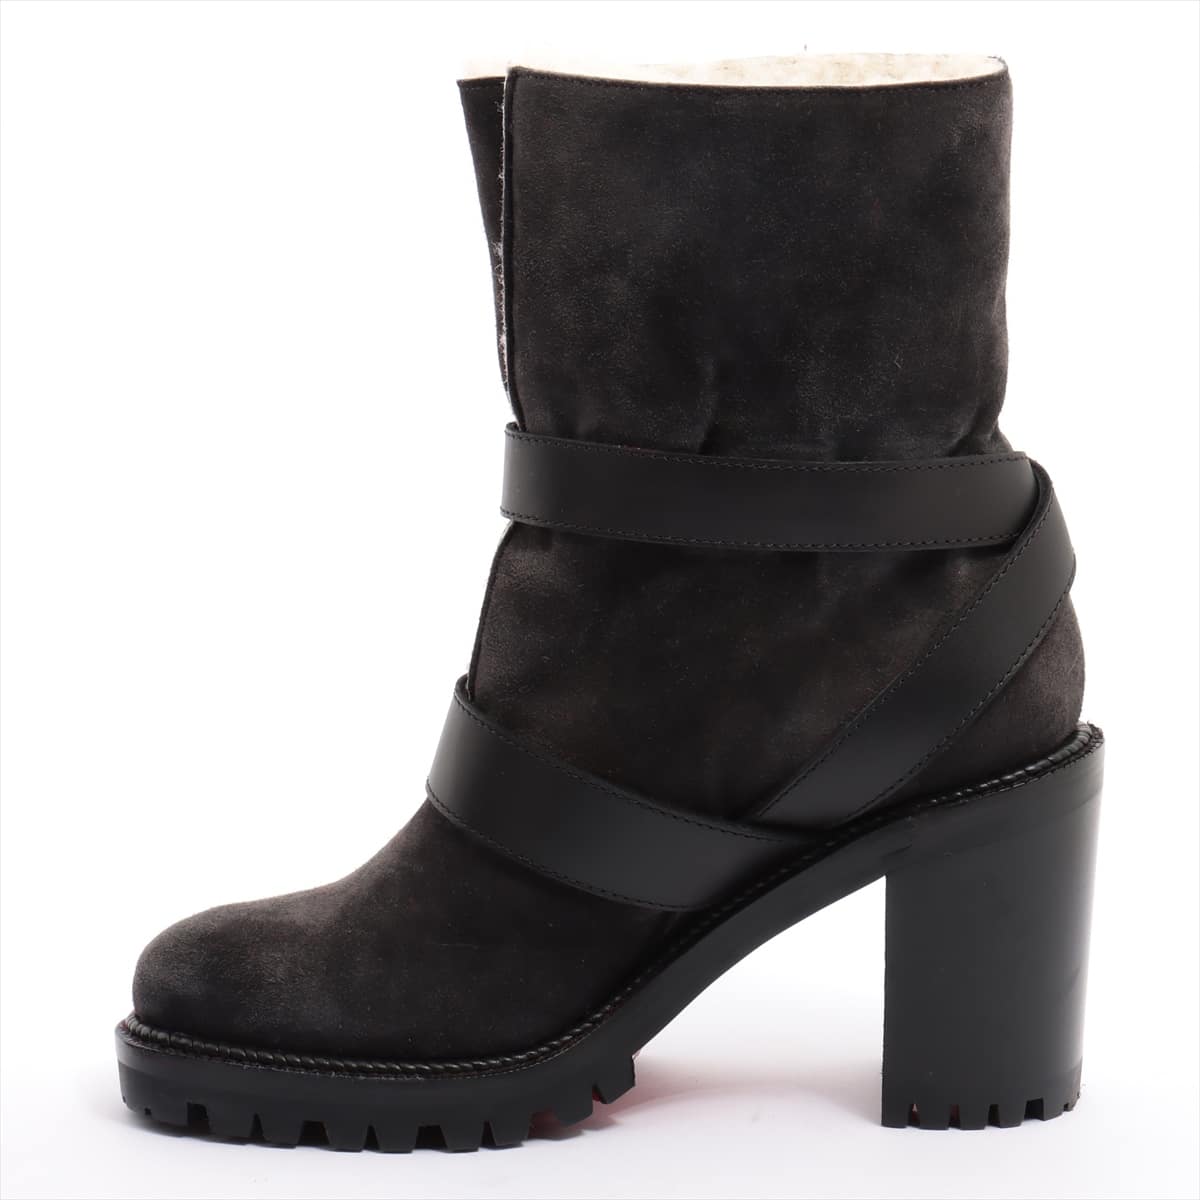 Christian Louboutin Suede & leather Boots 34 Ladies' Black